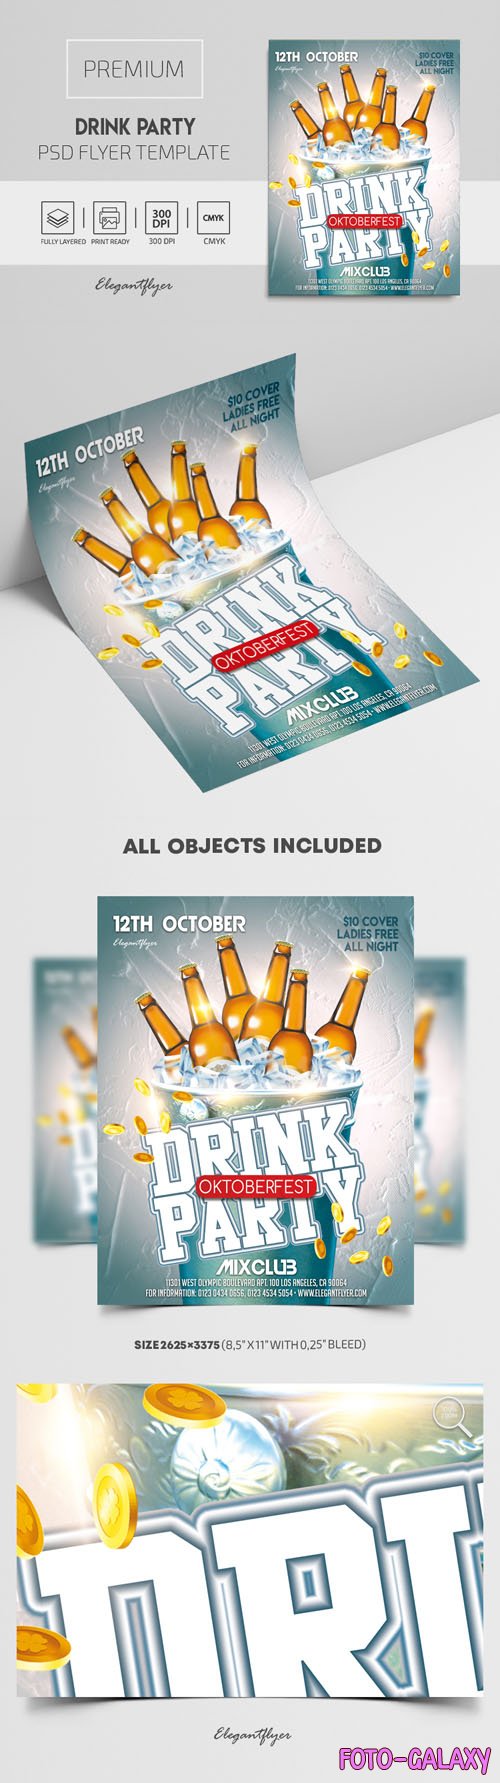 Drink Party Premium PSD Flyer Template